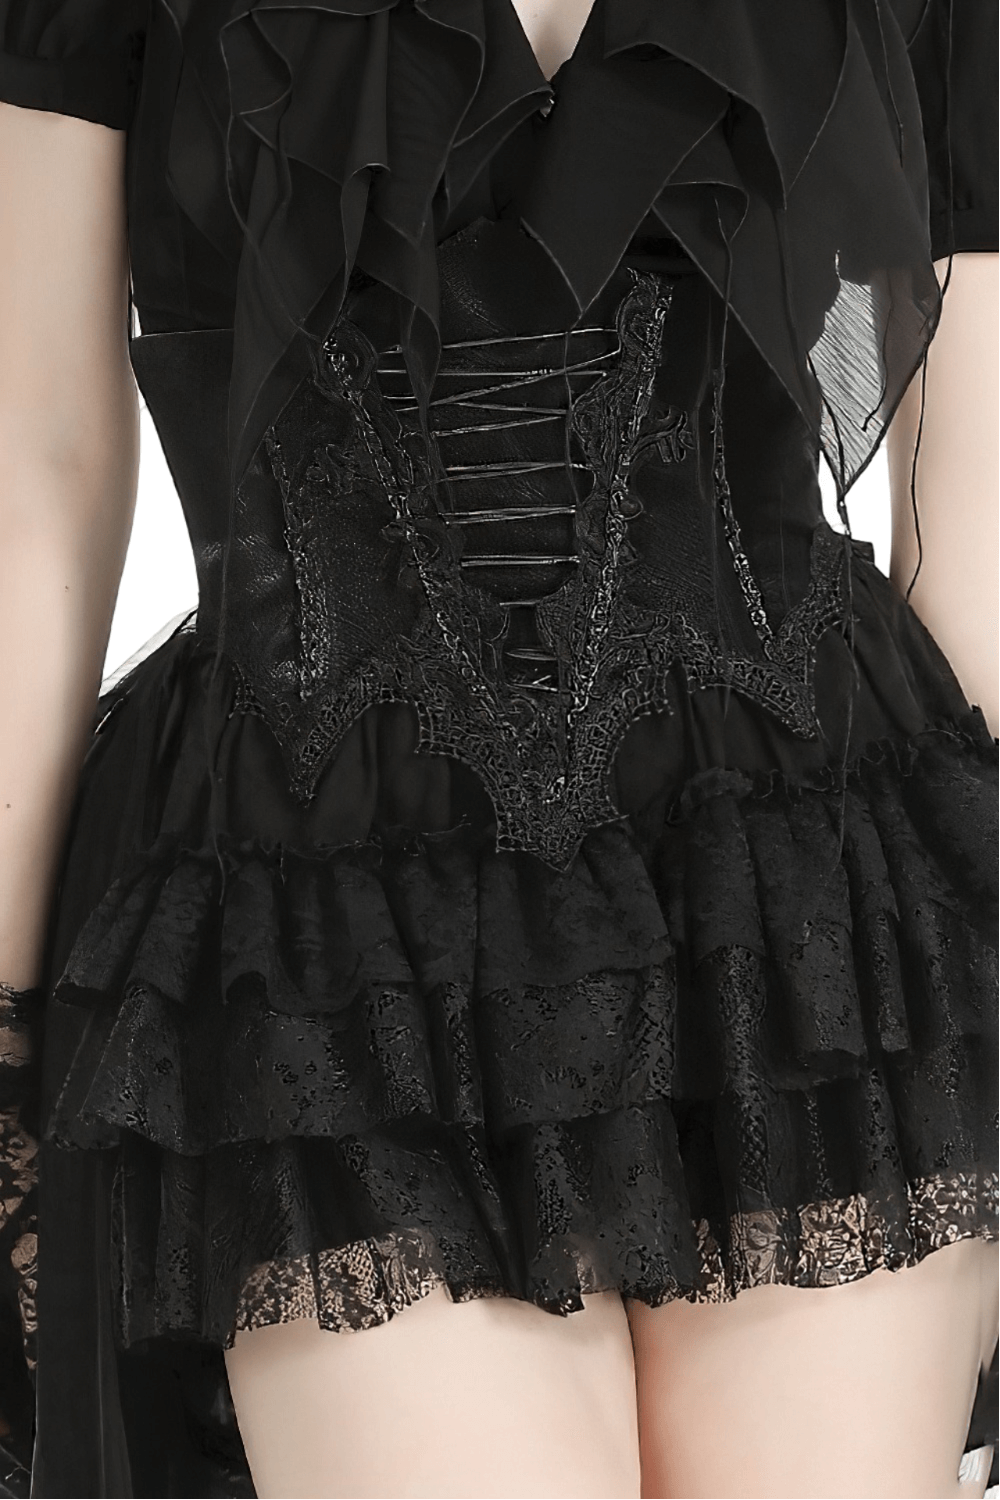 Gothic Lace-Up Corset Belt with Intricate Detailing